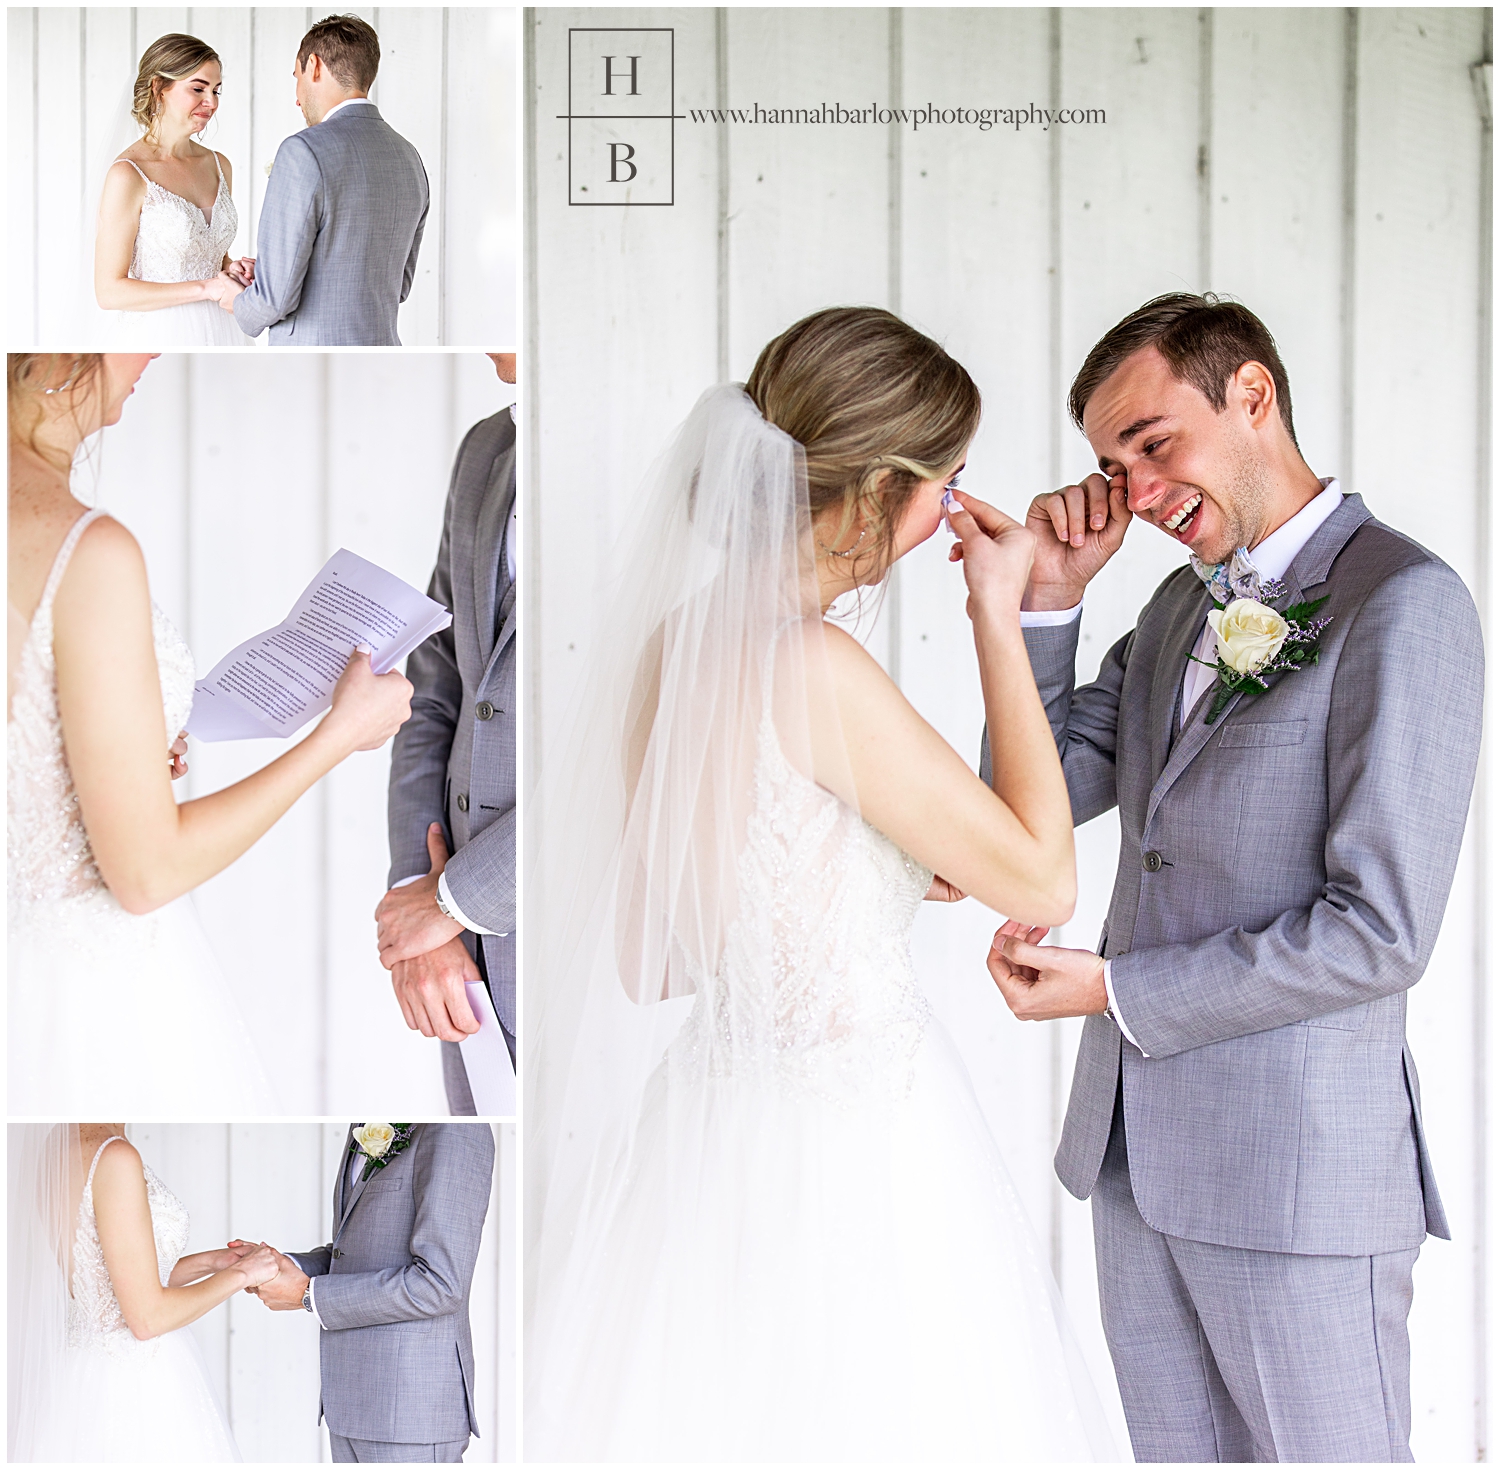 Wedding couple reads notes and sheds tears during their first look.